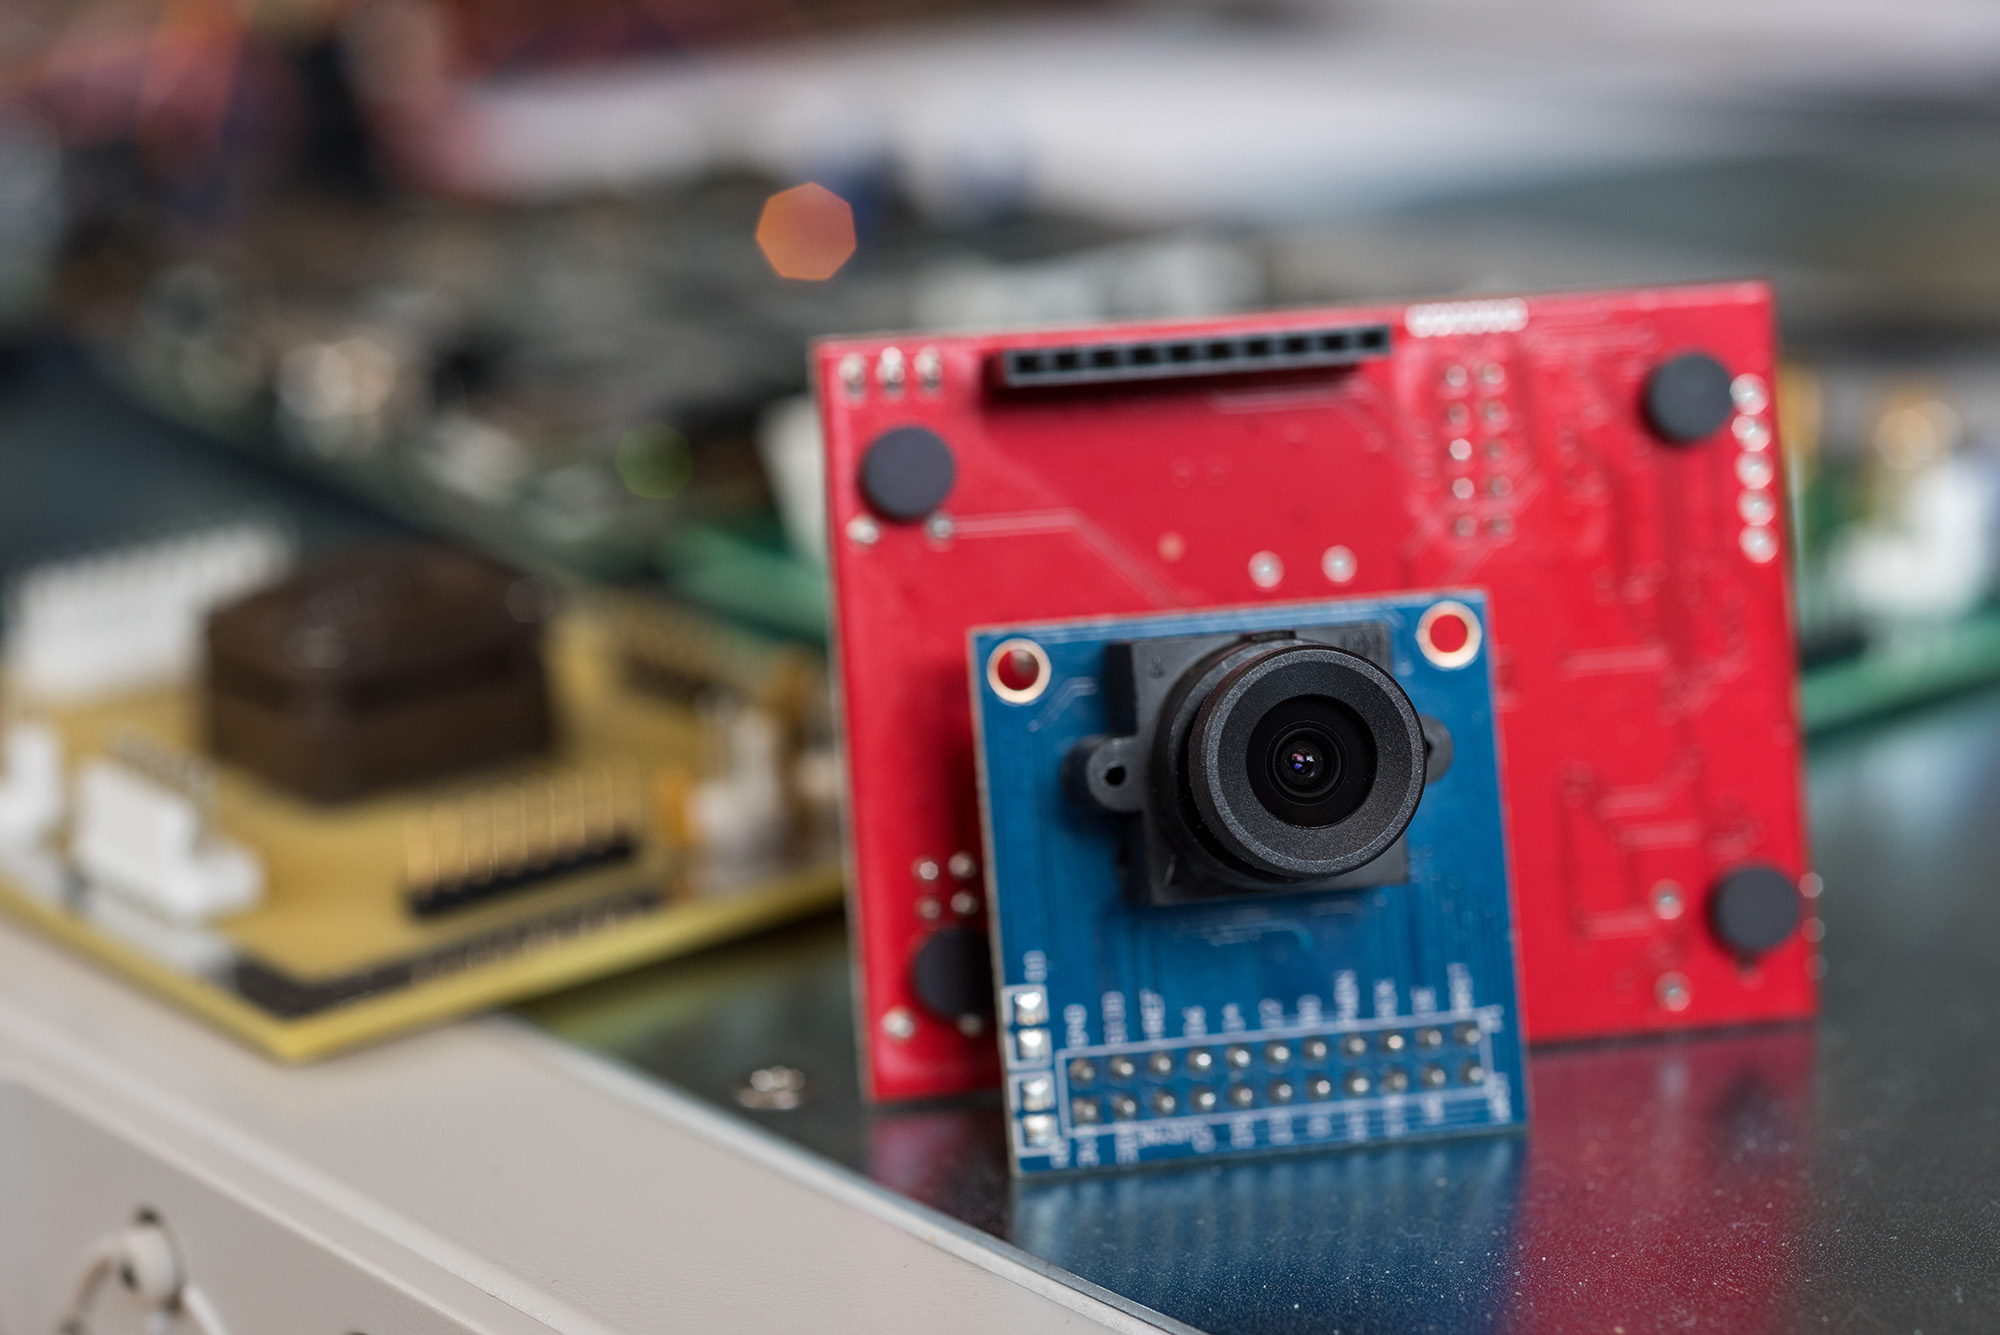 Researchers at Georgia Tech’s School of Electrical and Computer Engineering developed a low-power camera capable of recognizing gestures. (Credit: Rob Felt, Georgia Tech)